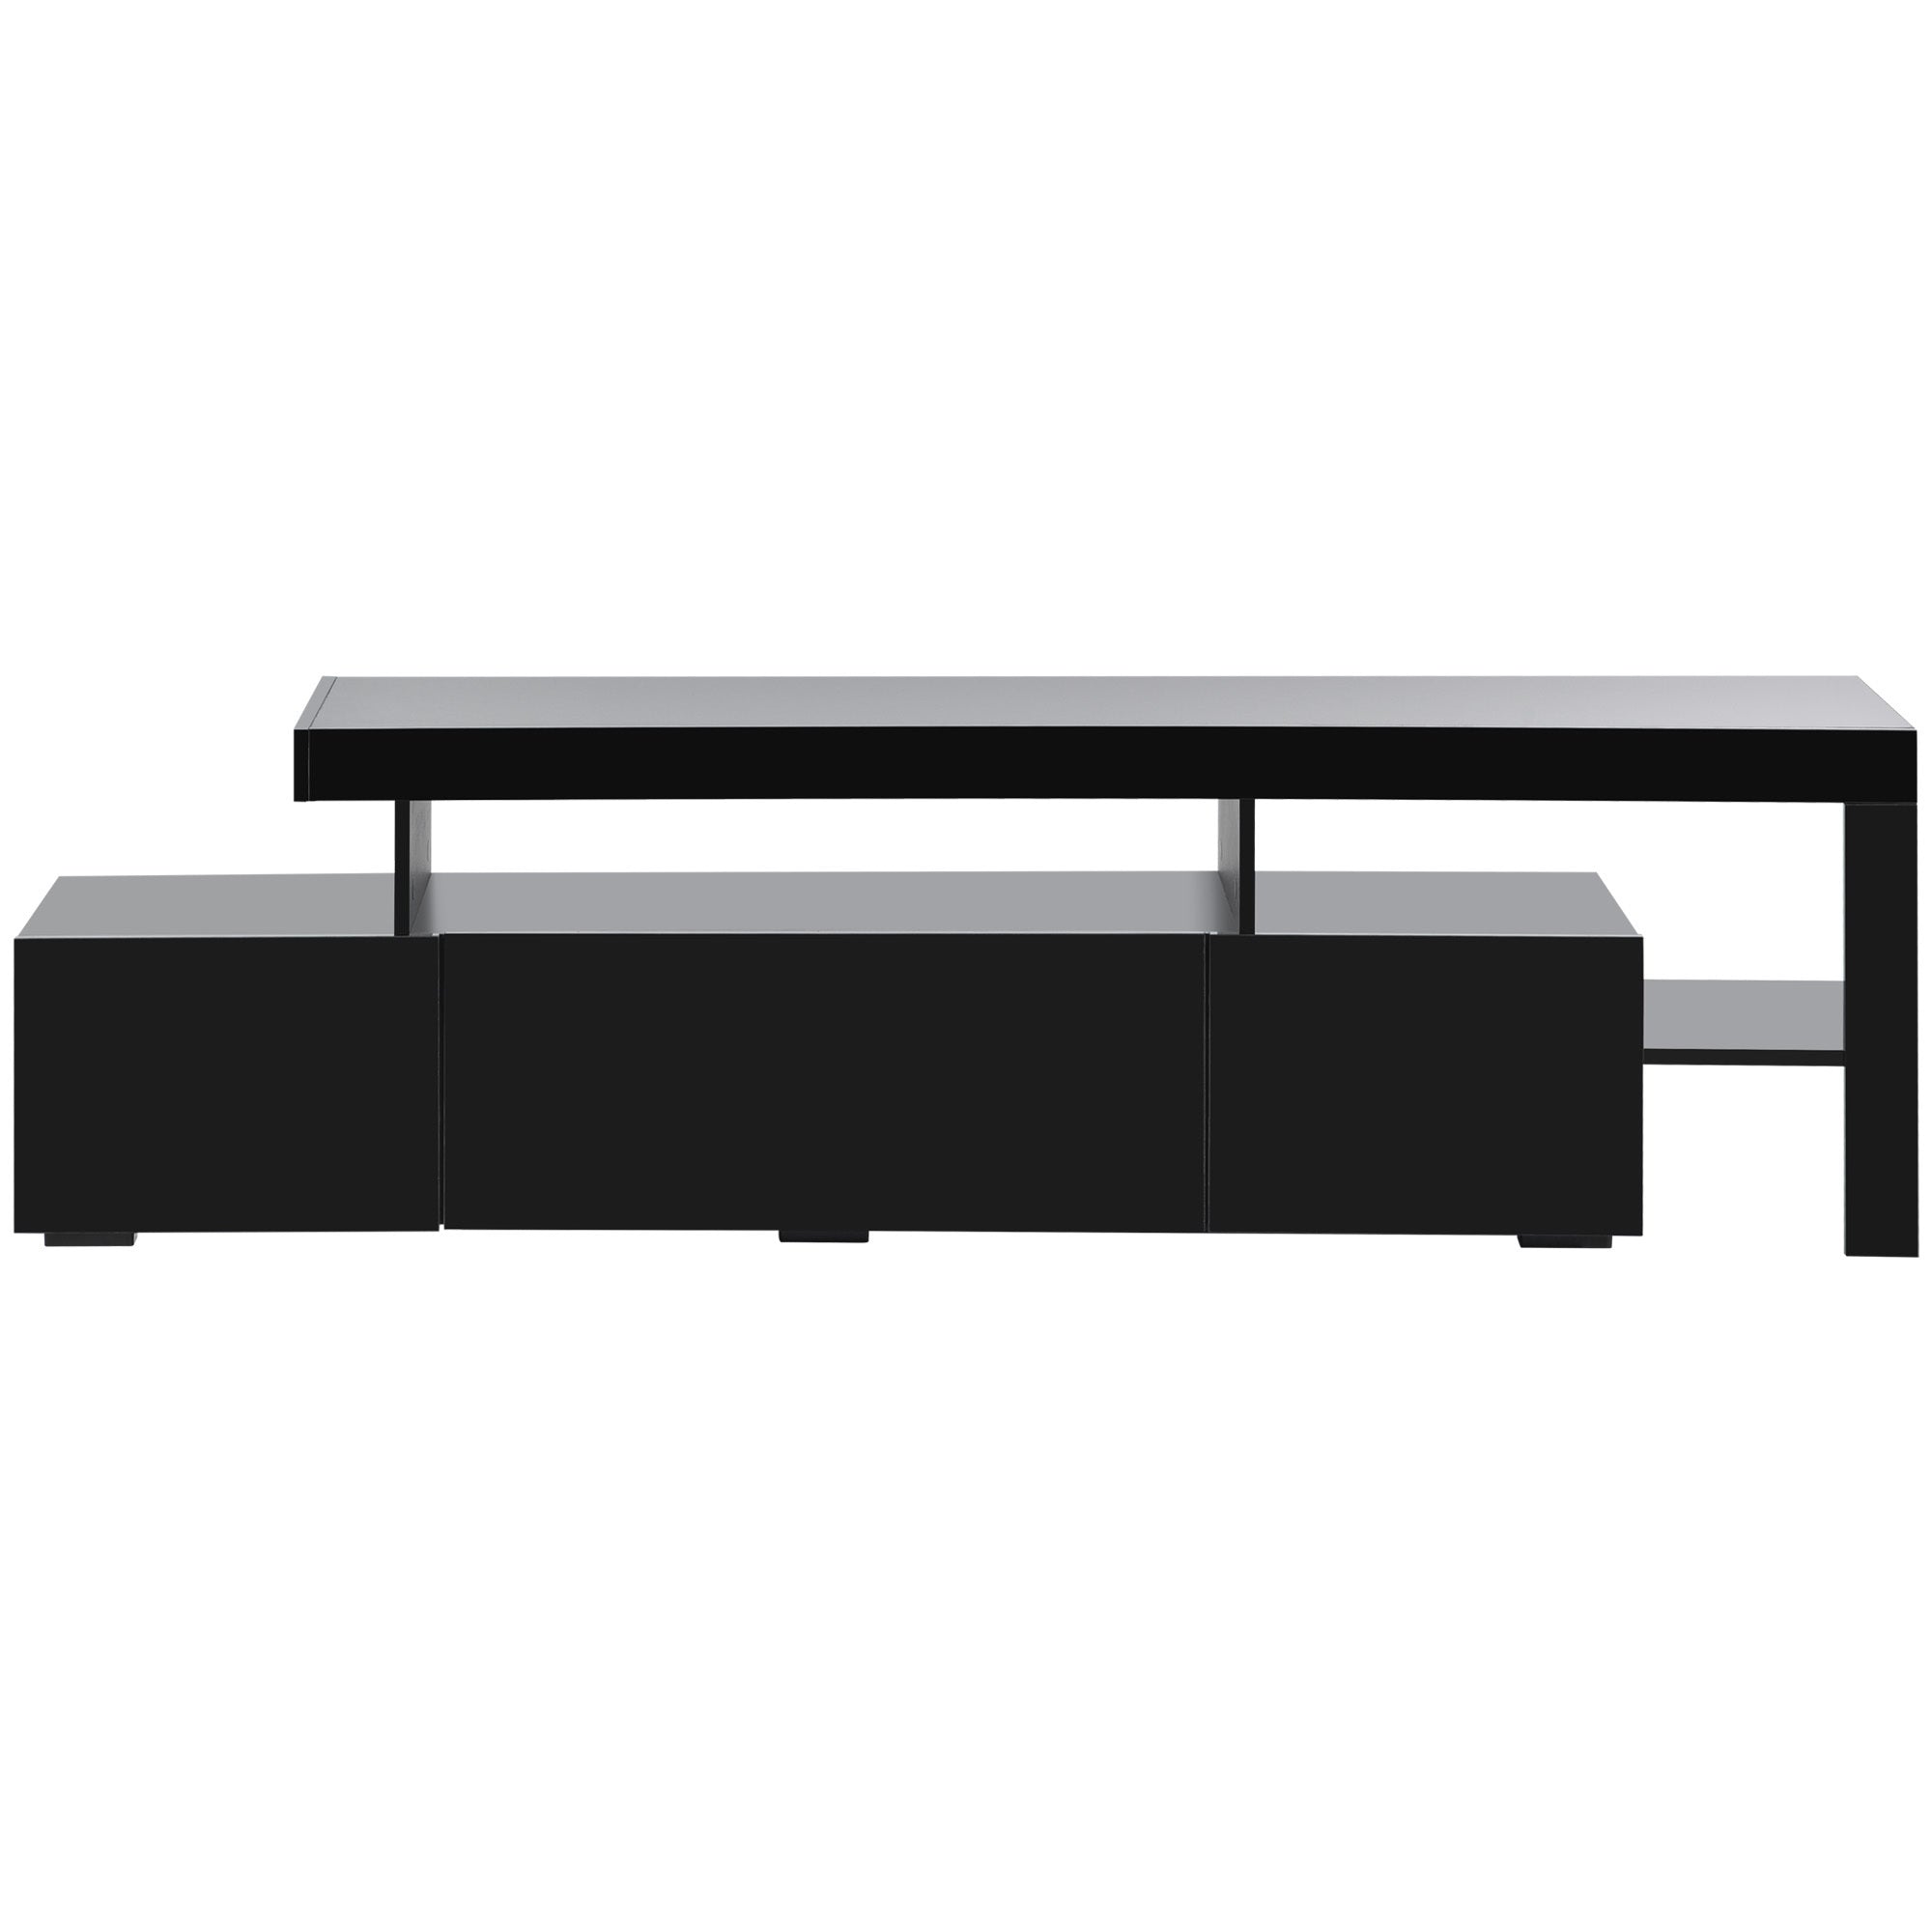 ON-TREND Contemporary TV Cabinet with LED Lights Up to 70 Inch TV (Black)